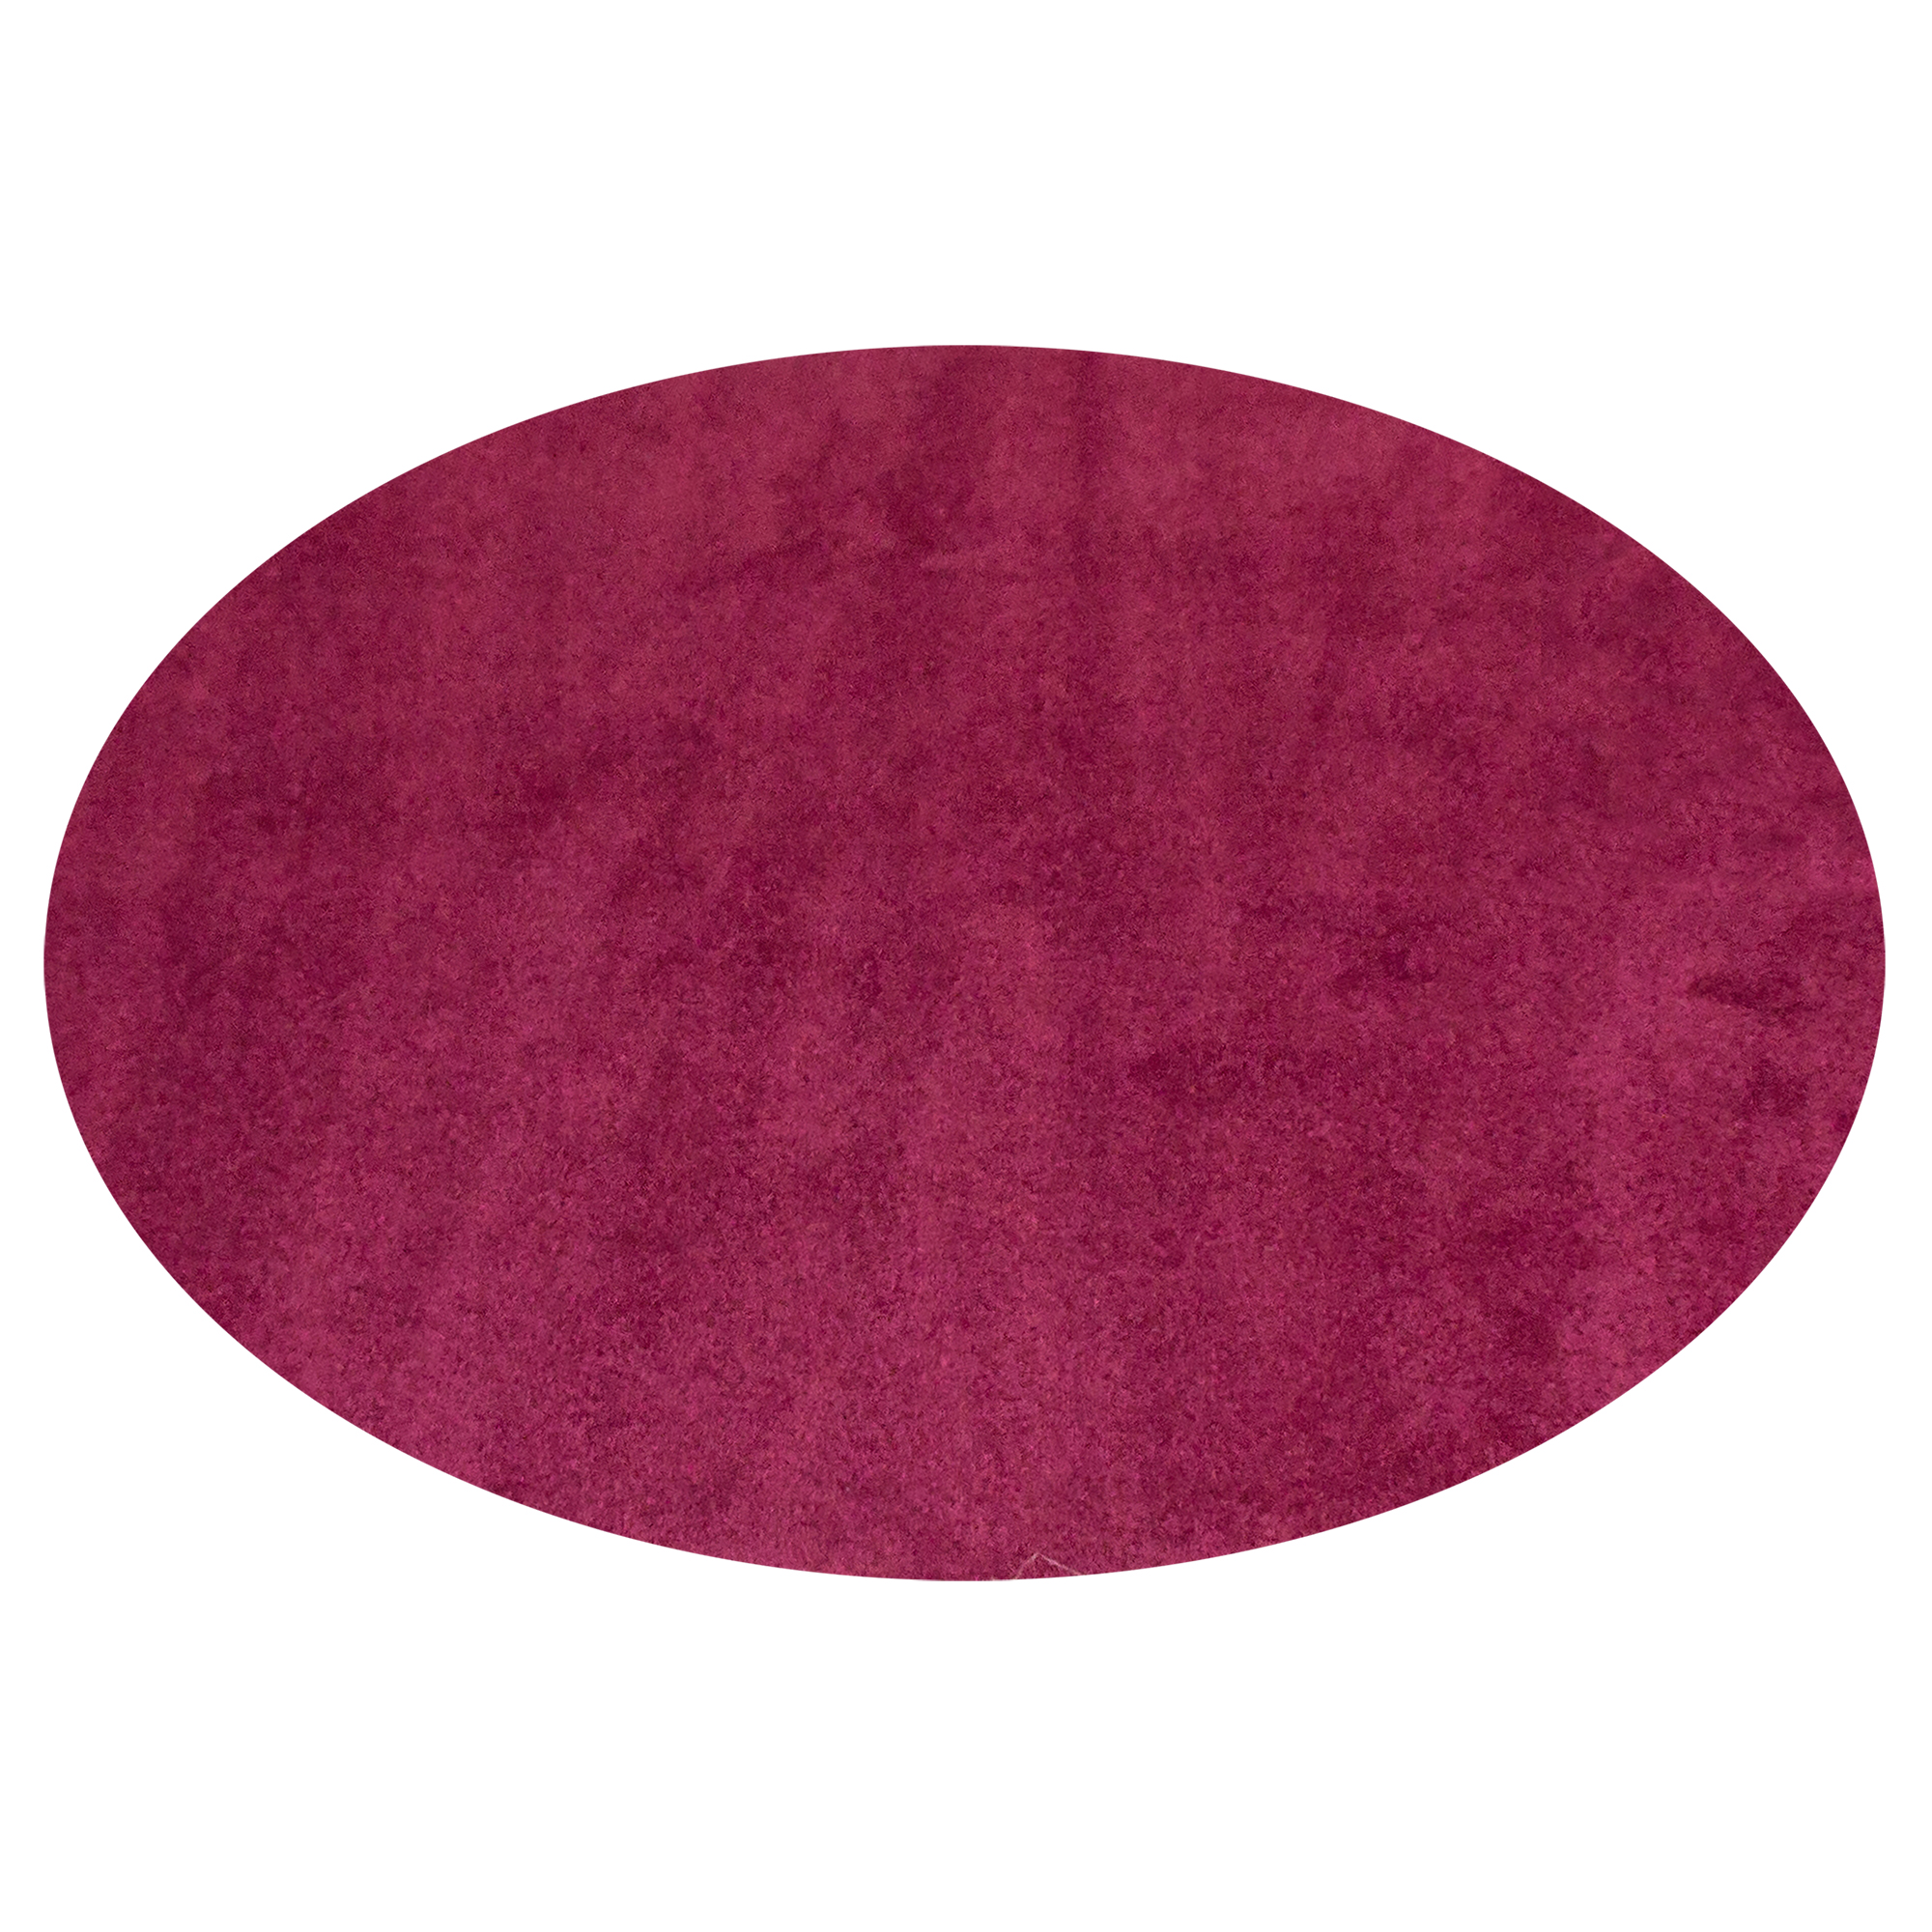 Cranberry Solid Rug - Round Large